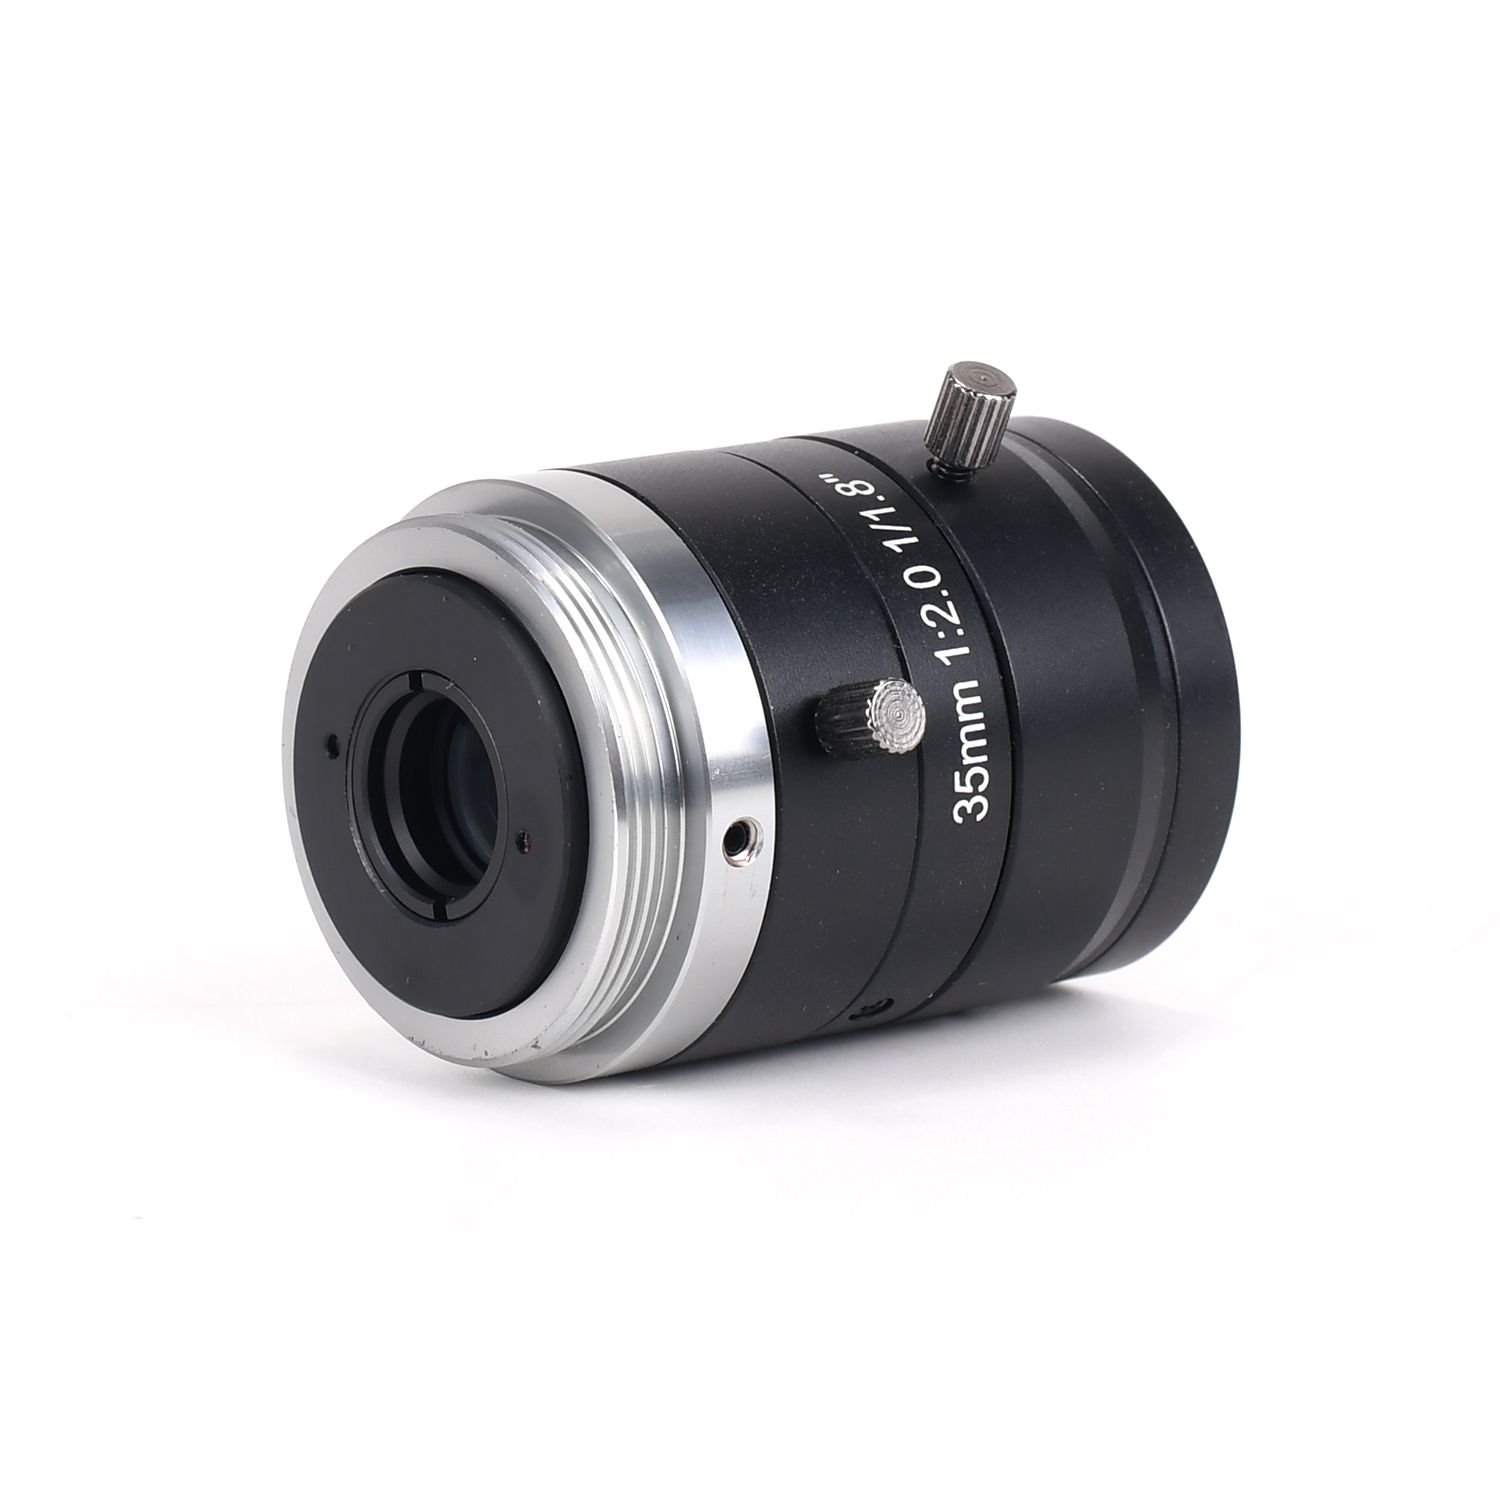 High Definition FA 35mm 1/1.8" Machine Vision Lens Without Distortion Professional C-Mouth Industrial Camera lens